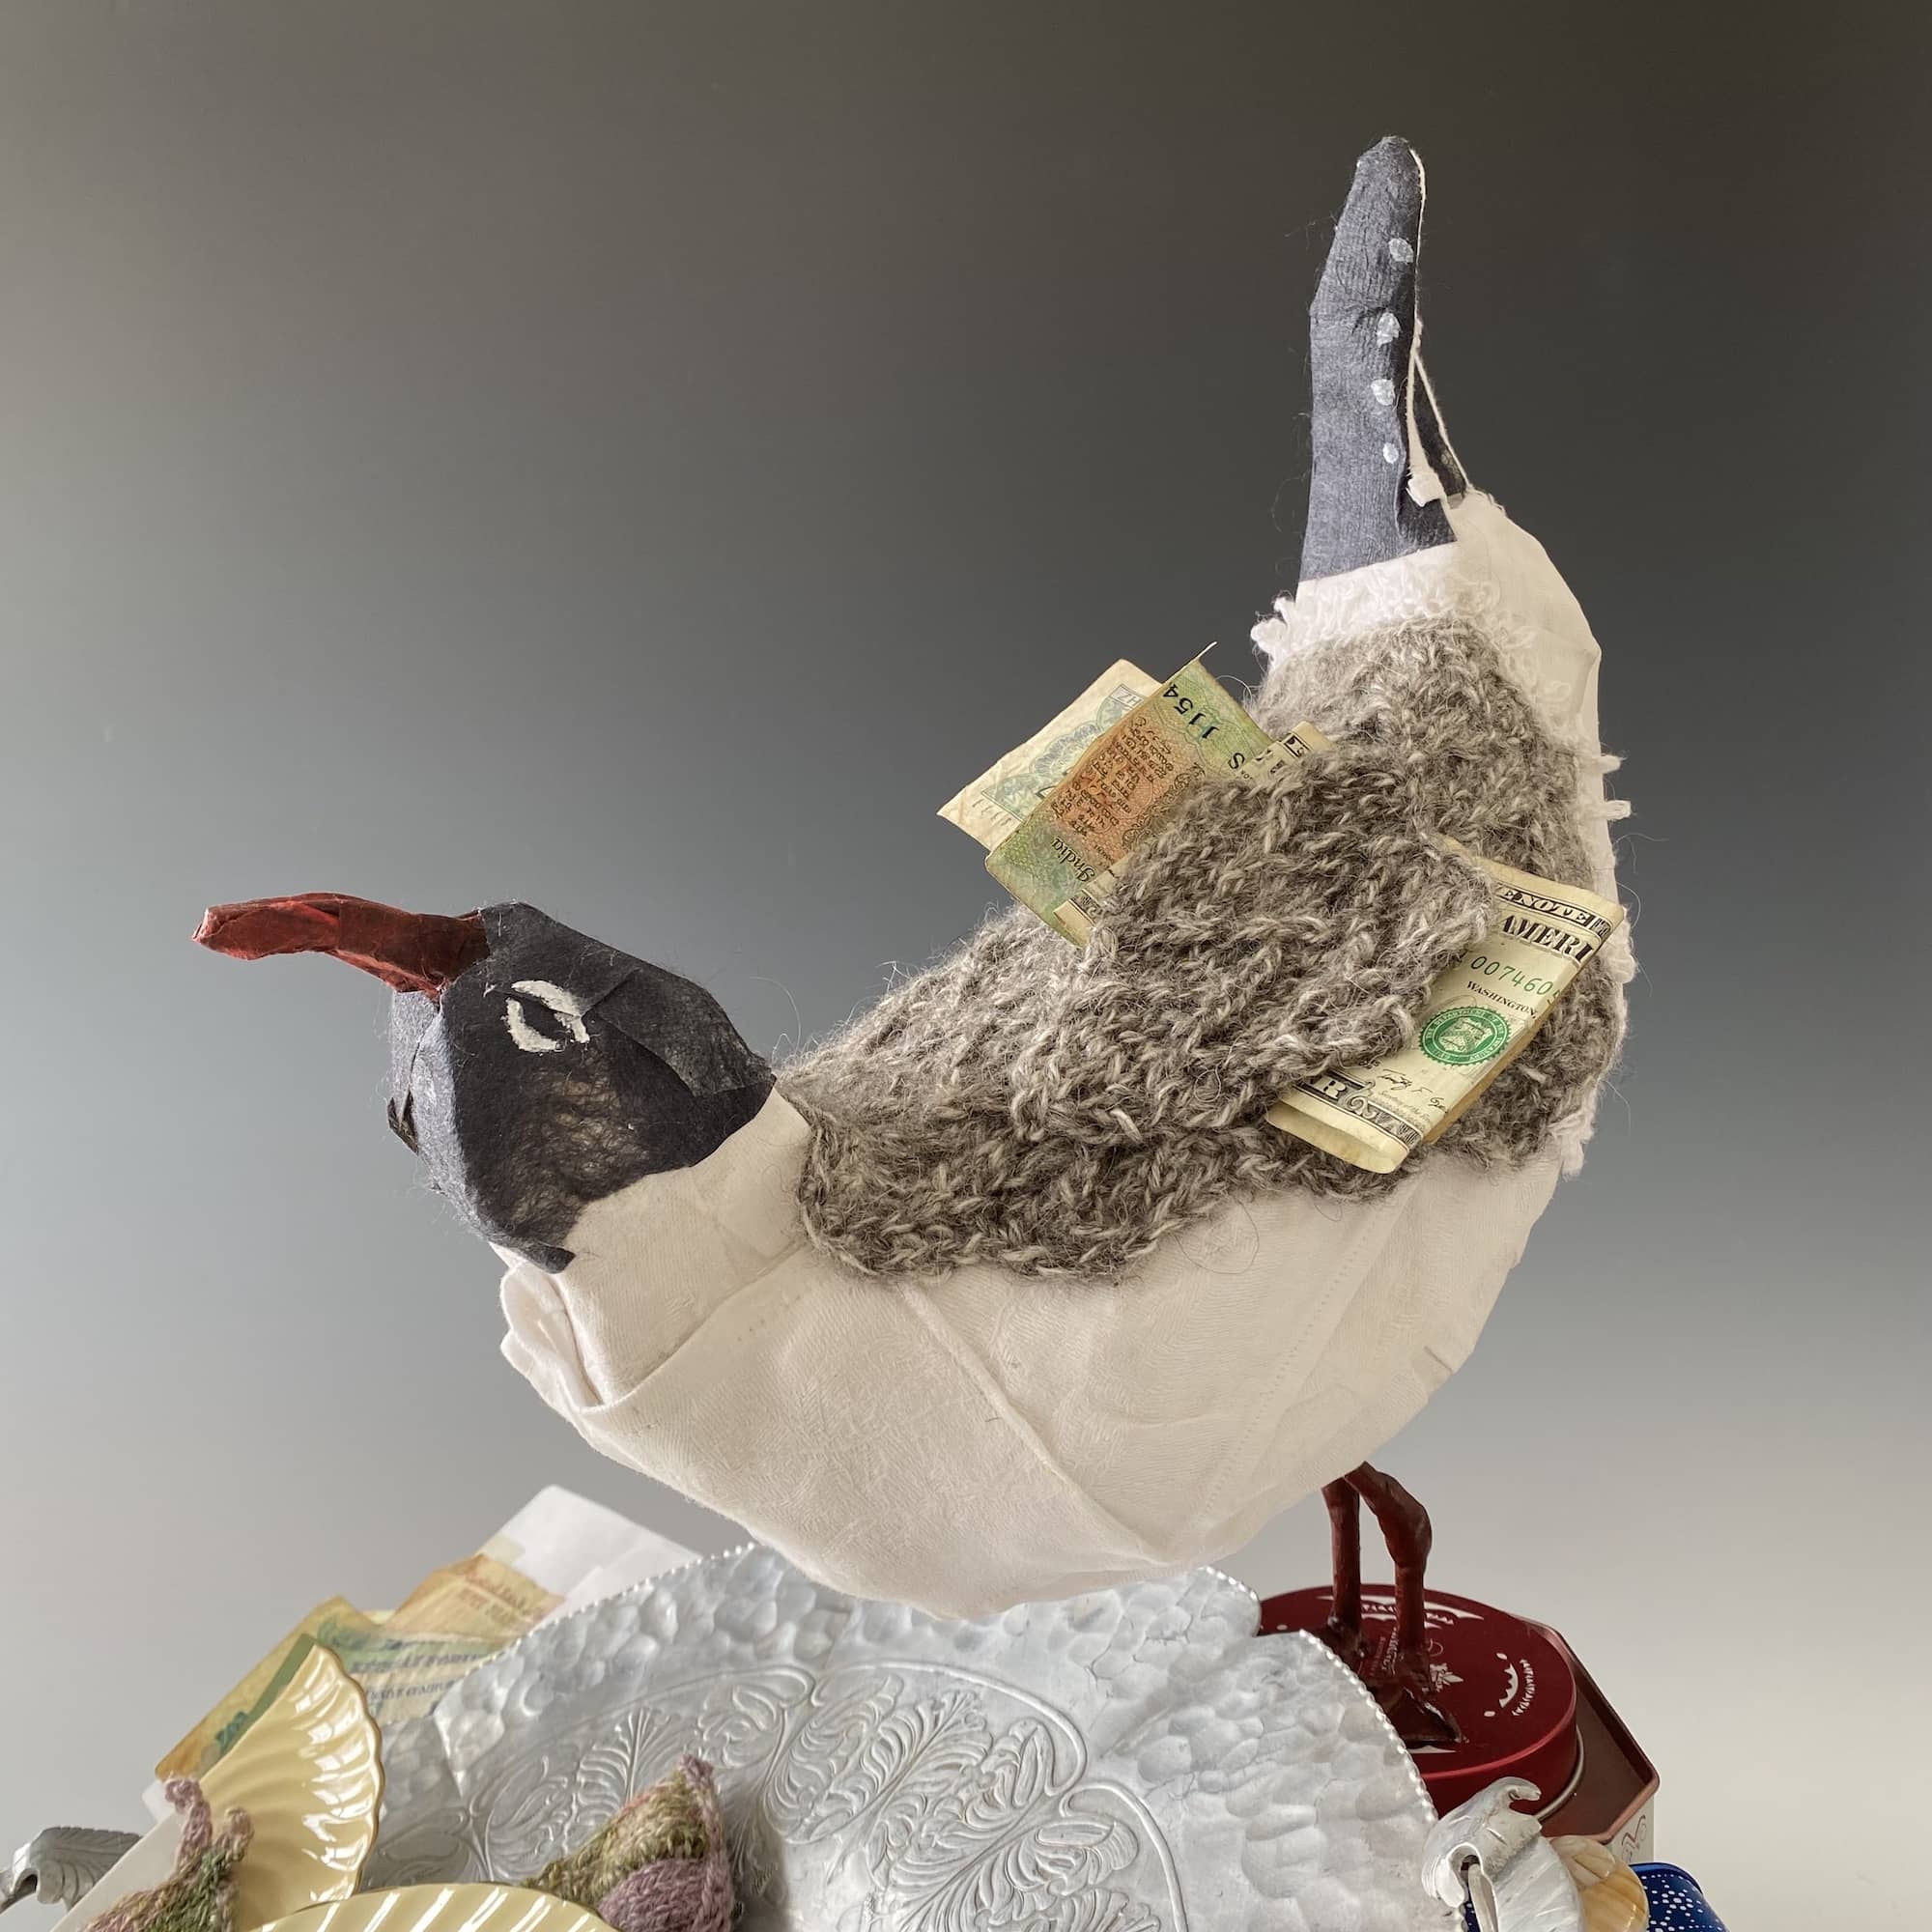 mixed media sculpture of laughing gull with black silk head, white linen breast, knitted wool body, with currency tucked under wing